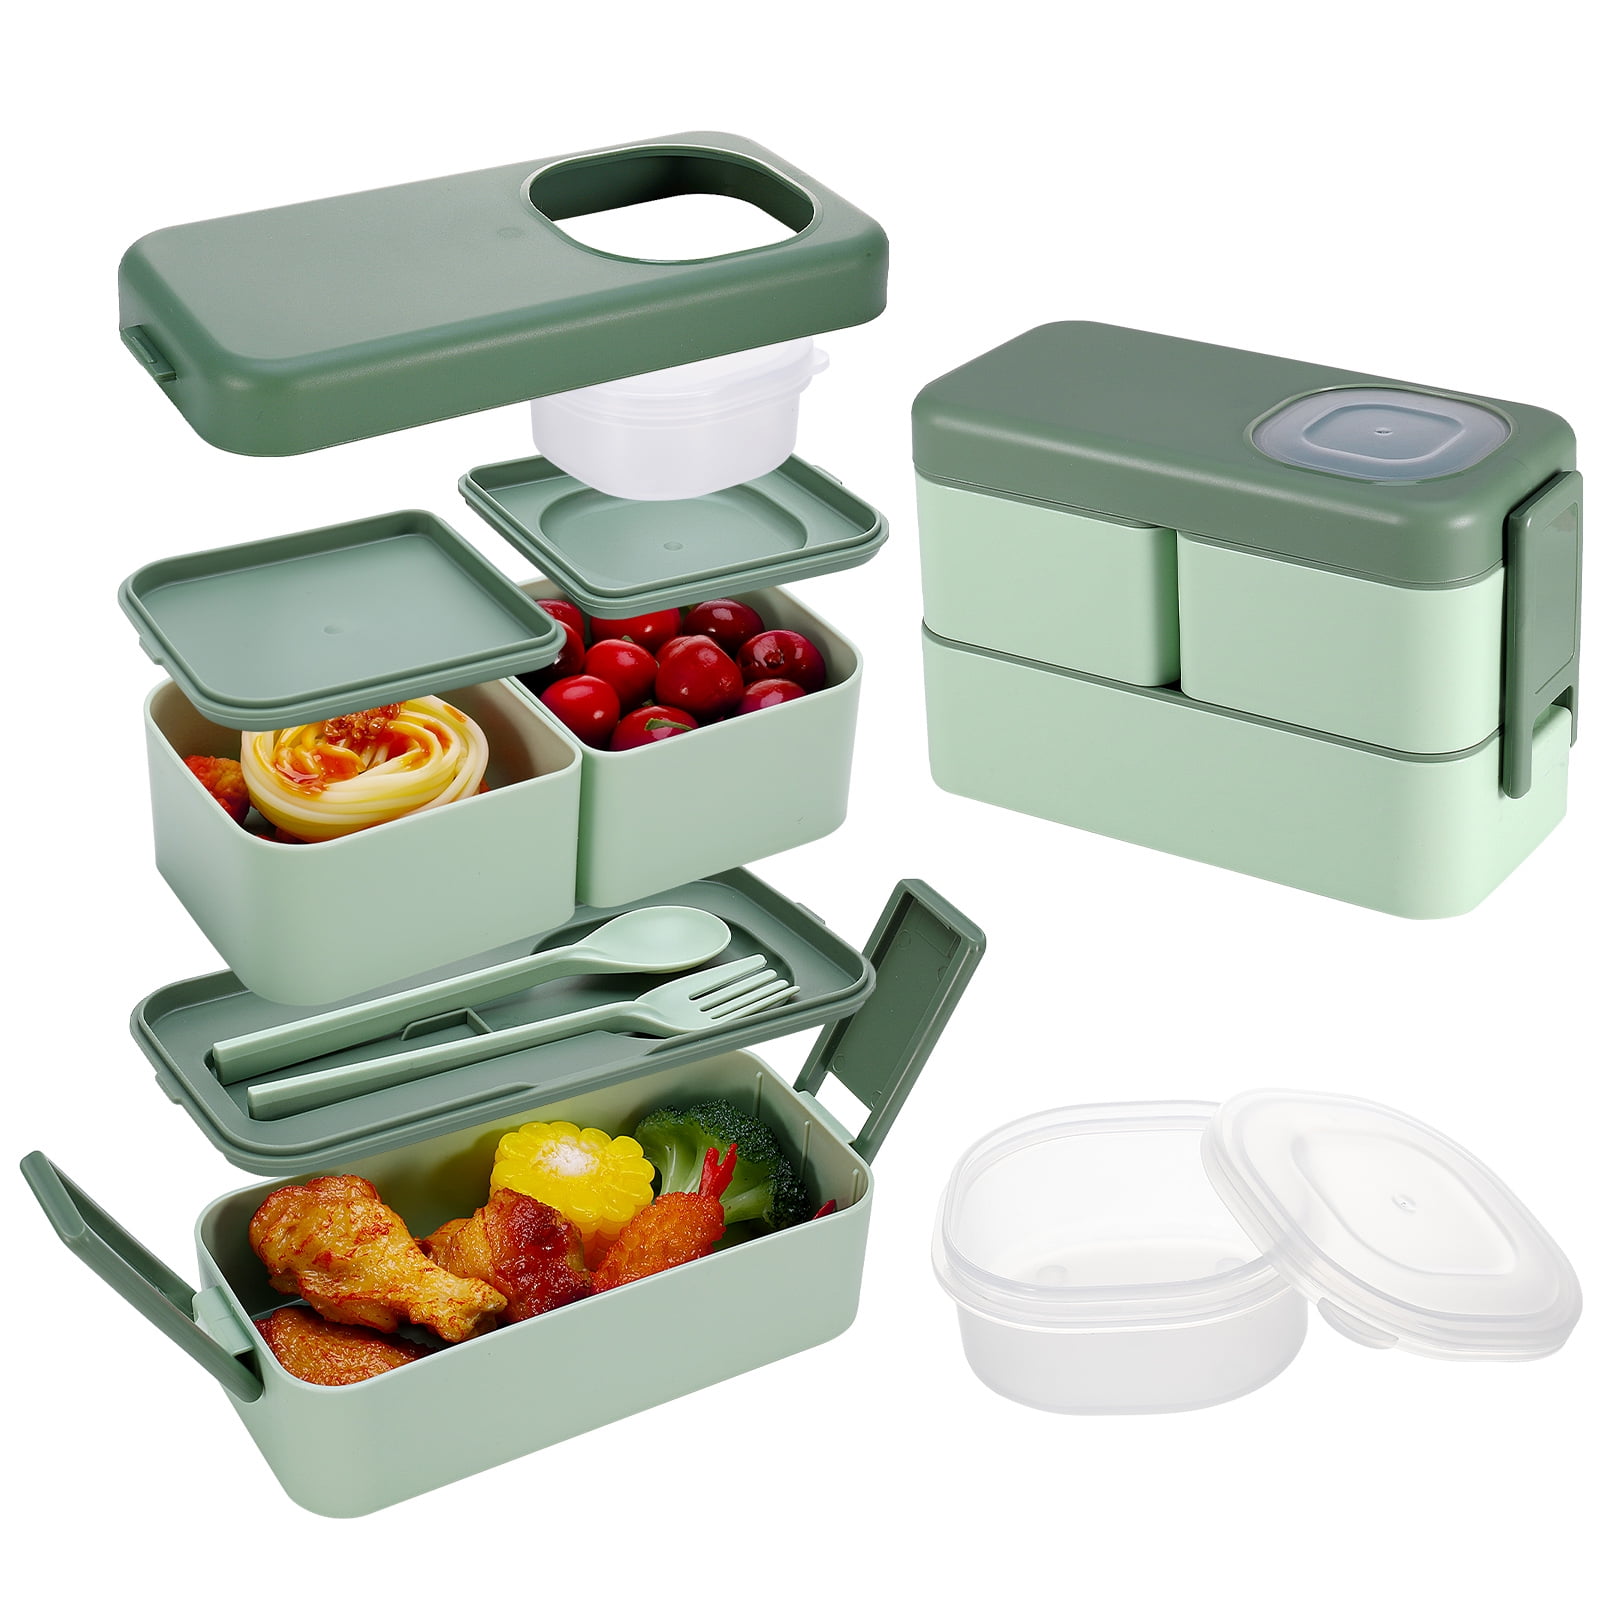 3 Sprouts Silicone Bento Box - 3-Compartment Lunch Box - BPA-Free & Food-Safe Snack Box for Adults & Kids - Microwavable, Dishwa